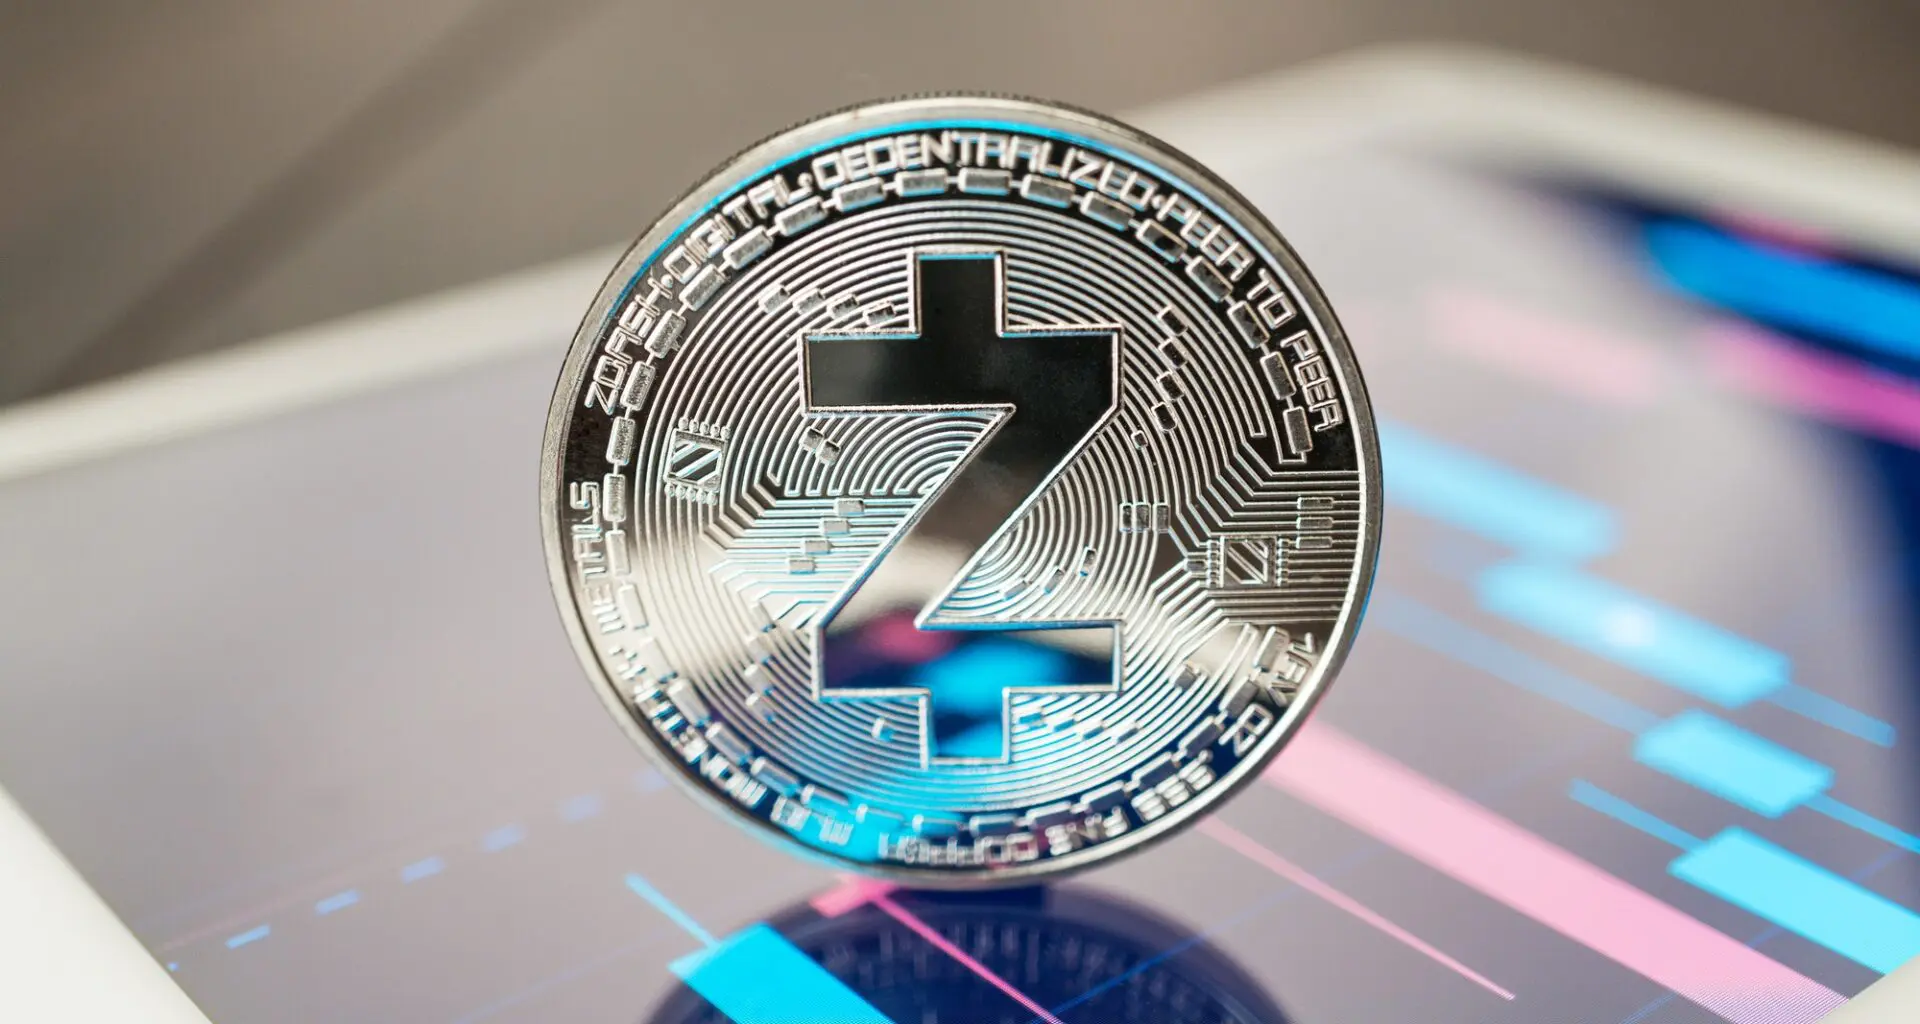 A silver-colored Zcash cryptocurrency coin, placed on a reflective surface with colorful digital patterns in the background.